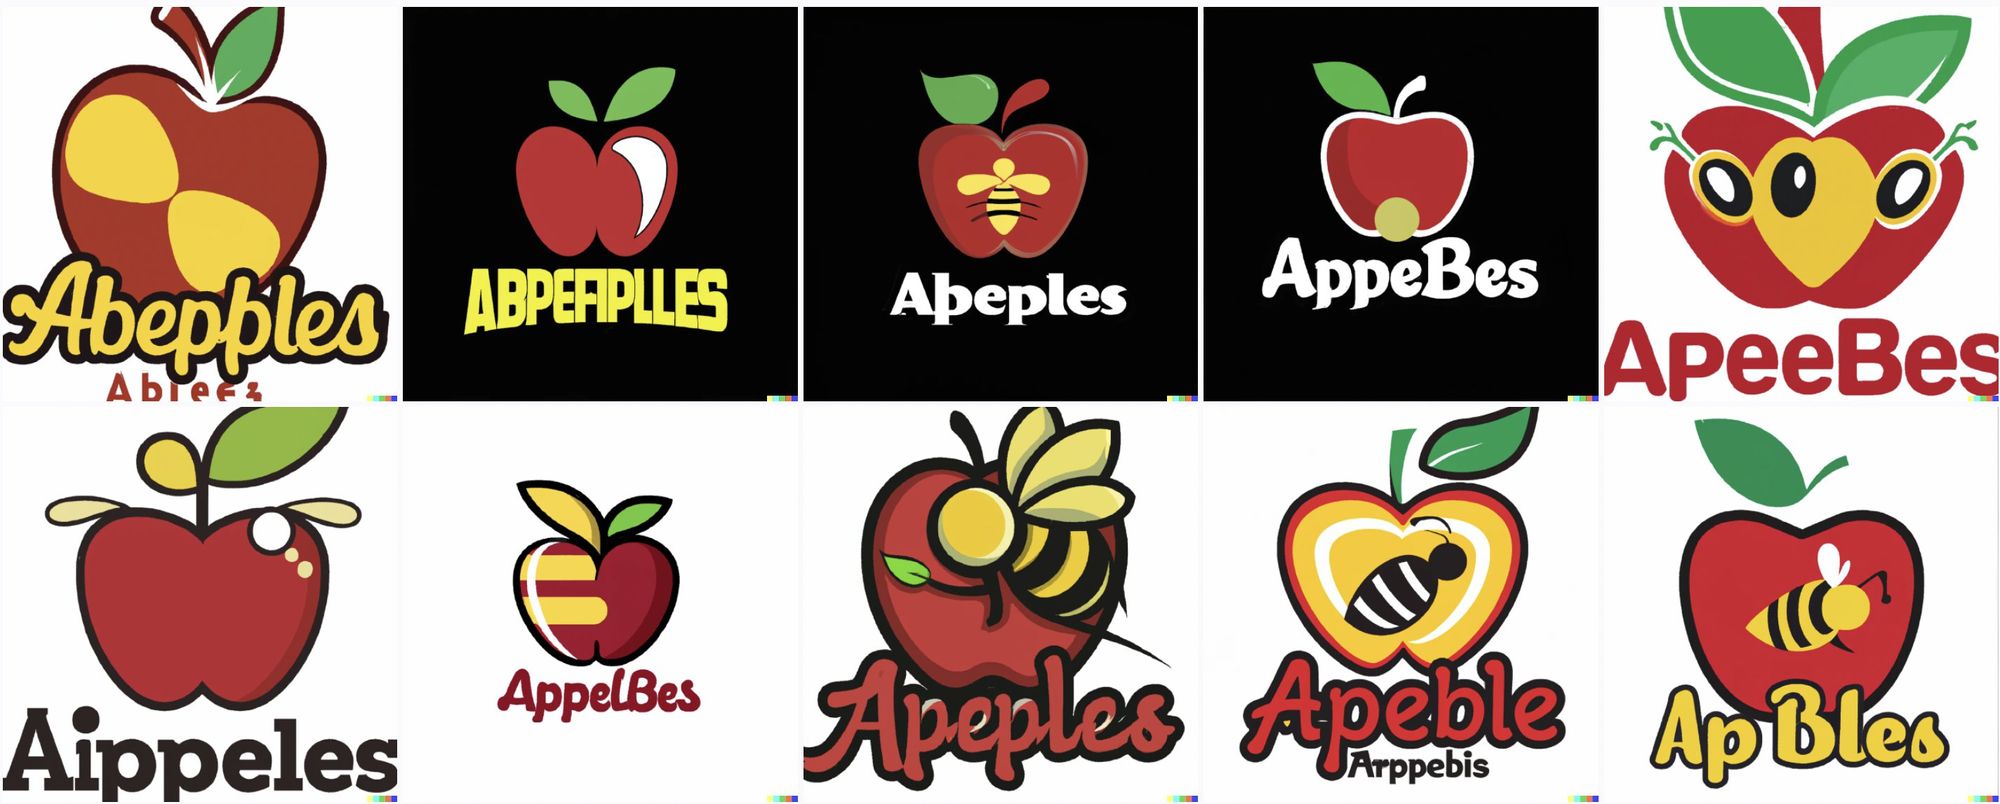 Red apple logos, some with bumblebees on them. Text reads "Aippeles" or "Abperiplles" or "Abepples" or "Apeebes"